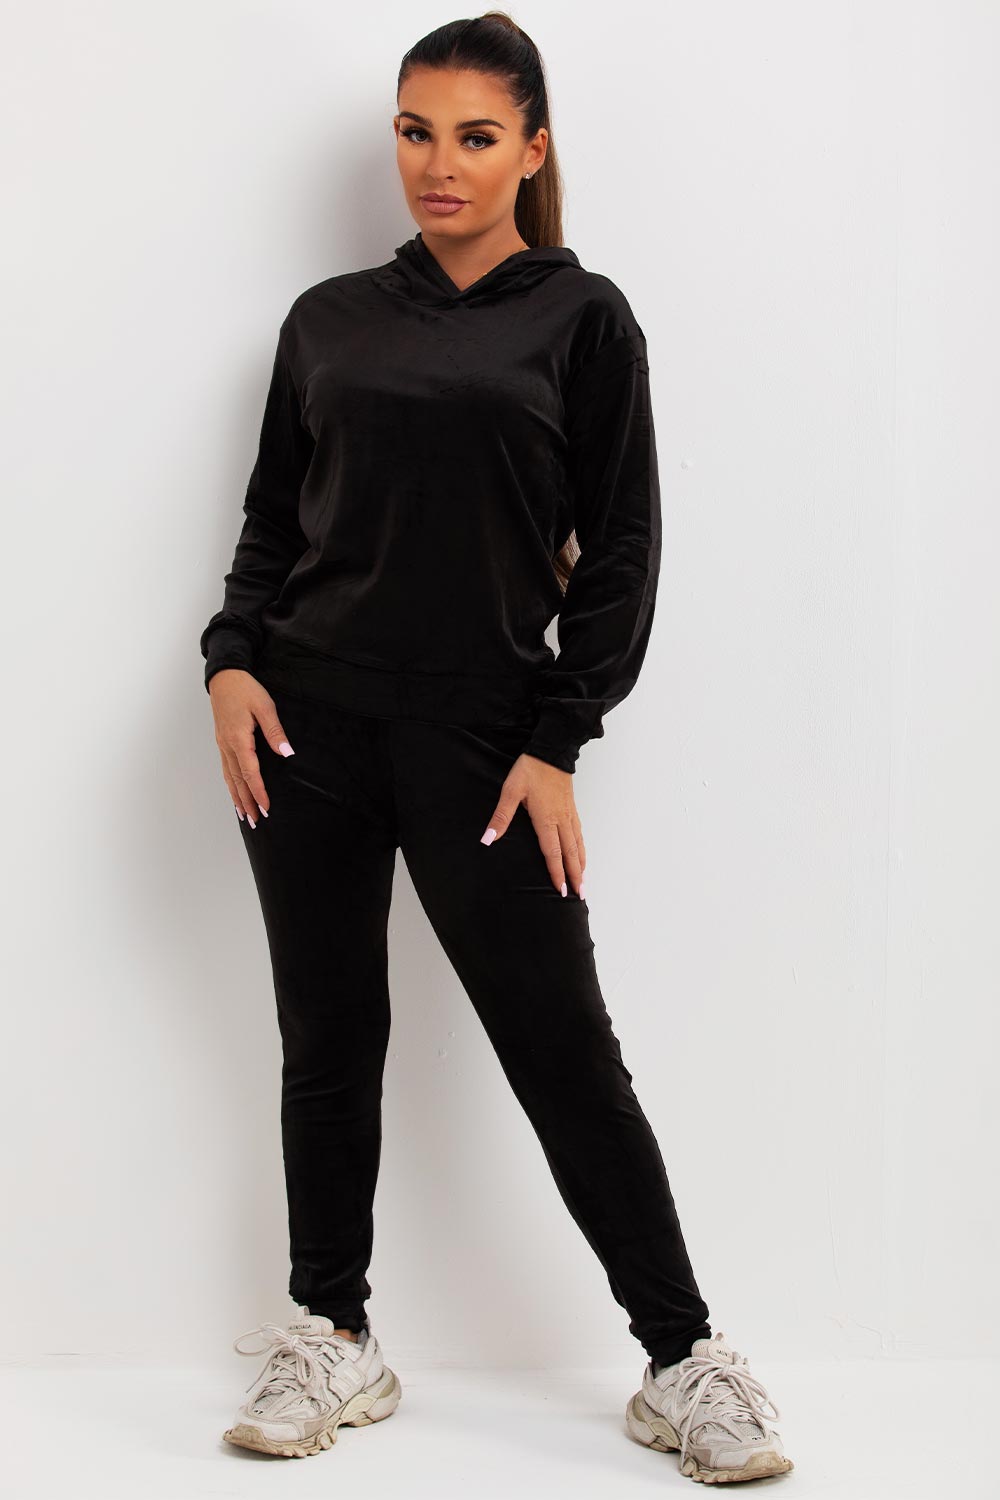 womens velour tracksuit co ord hooded loungewear set